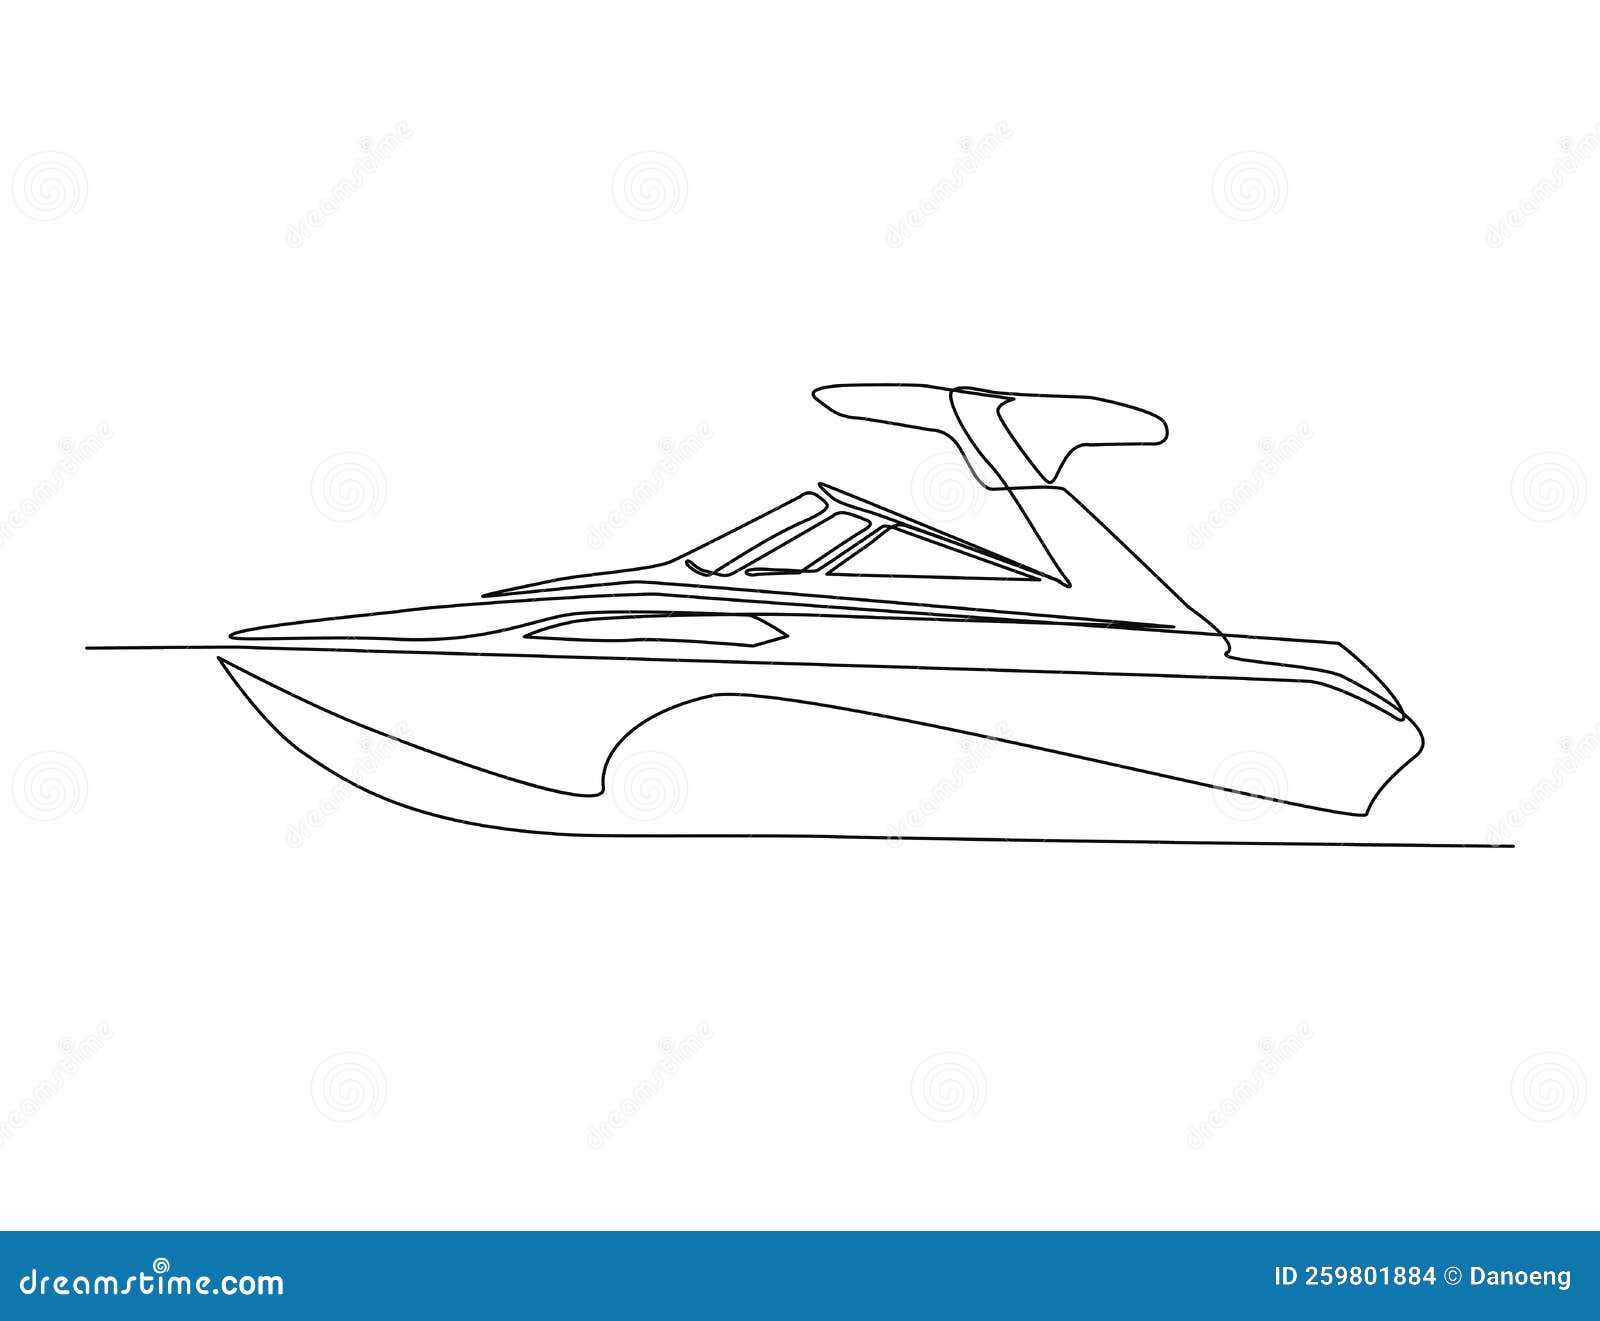 Continuous Single Line Drawing Art Of Luxury Yacht. Speed Boat